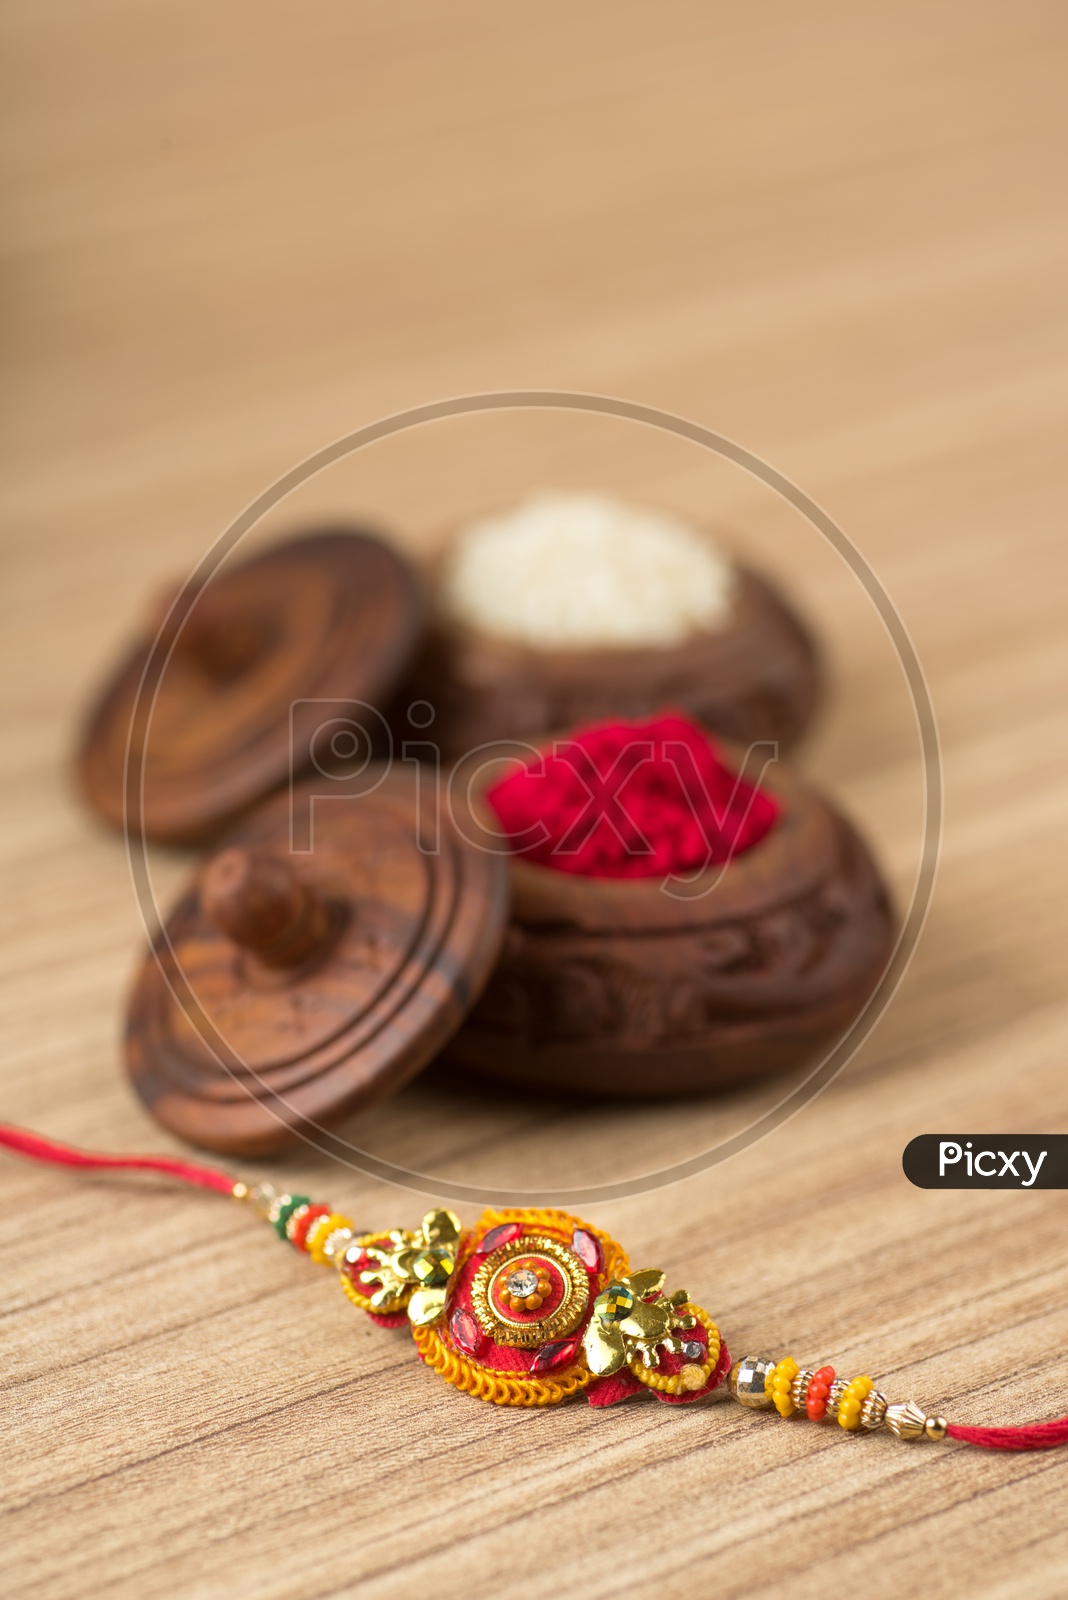 An Elegant Rakhi With Kumkum And Rice Grains On an Isolated Wooden Background